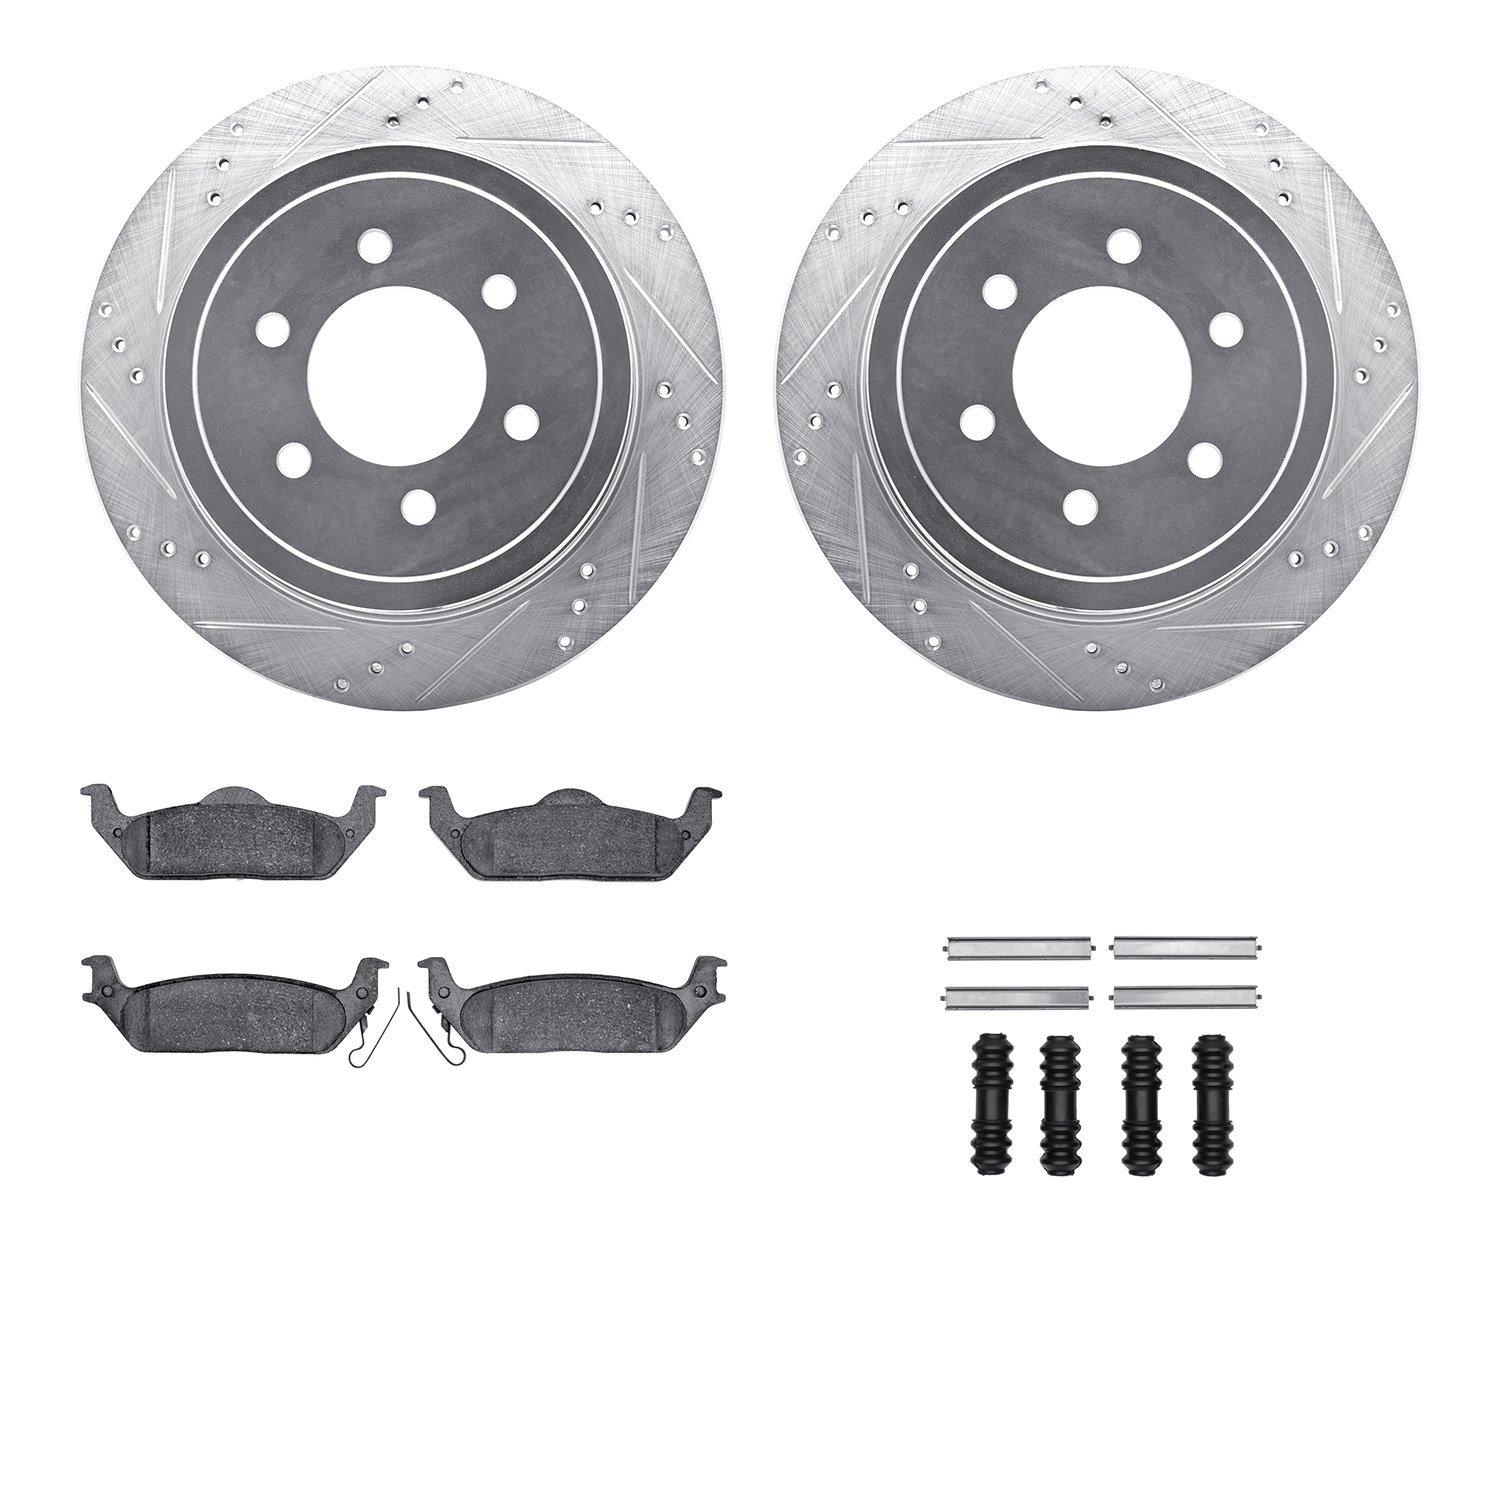 7412-54075 Drilled/Slotted Brake Rotors with Ultimate-Duty Brake Pads Kit & Hardware [Silver], 2004-2011 Ford/Lincoln/Mercury/Ma